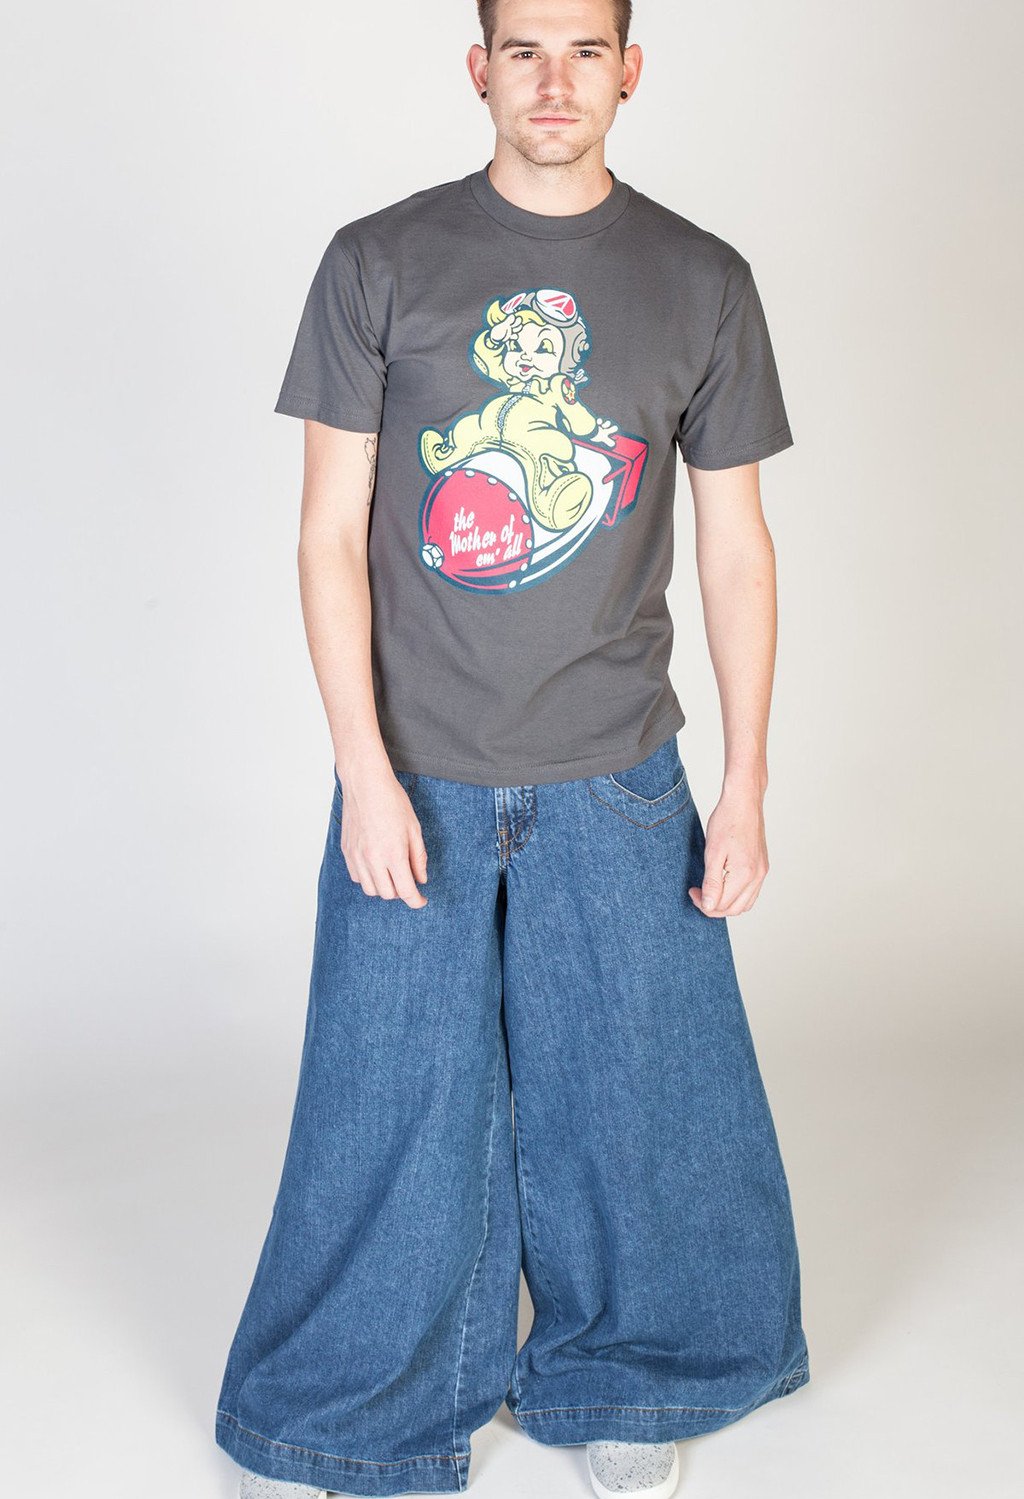 JNCO Jeans is closing shop, and 